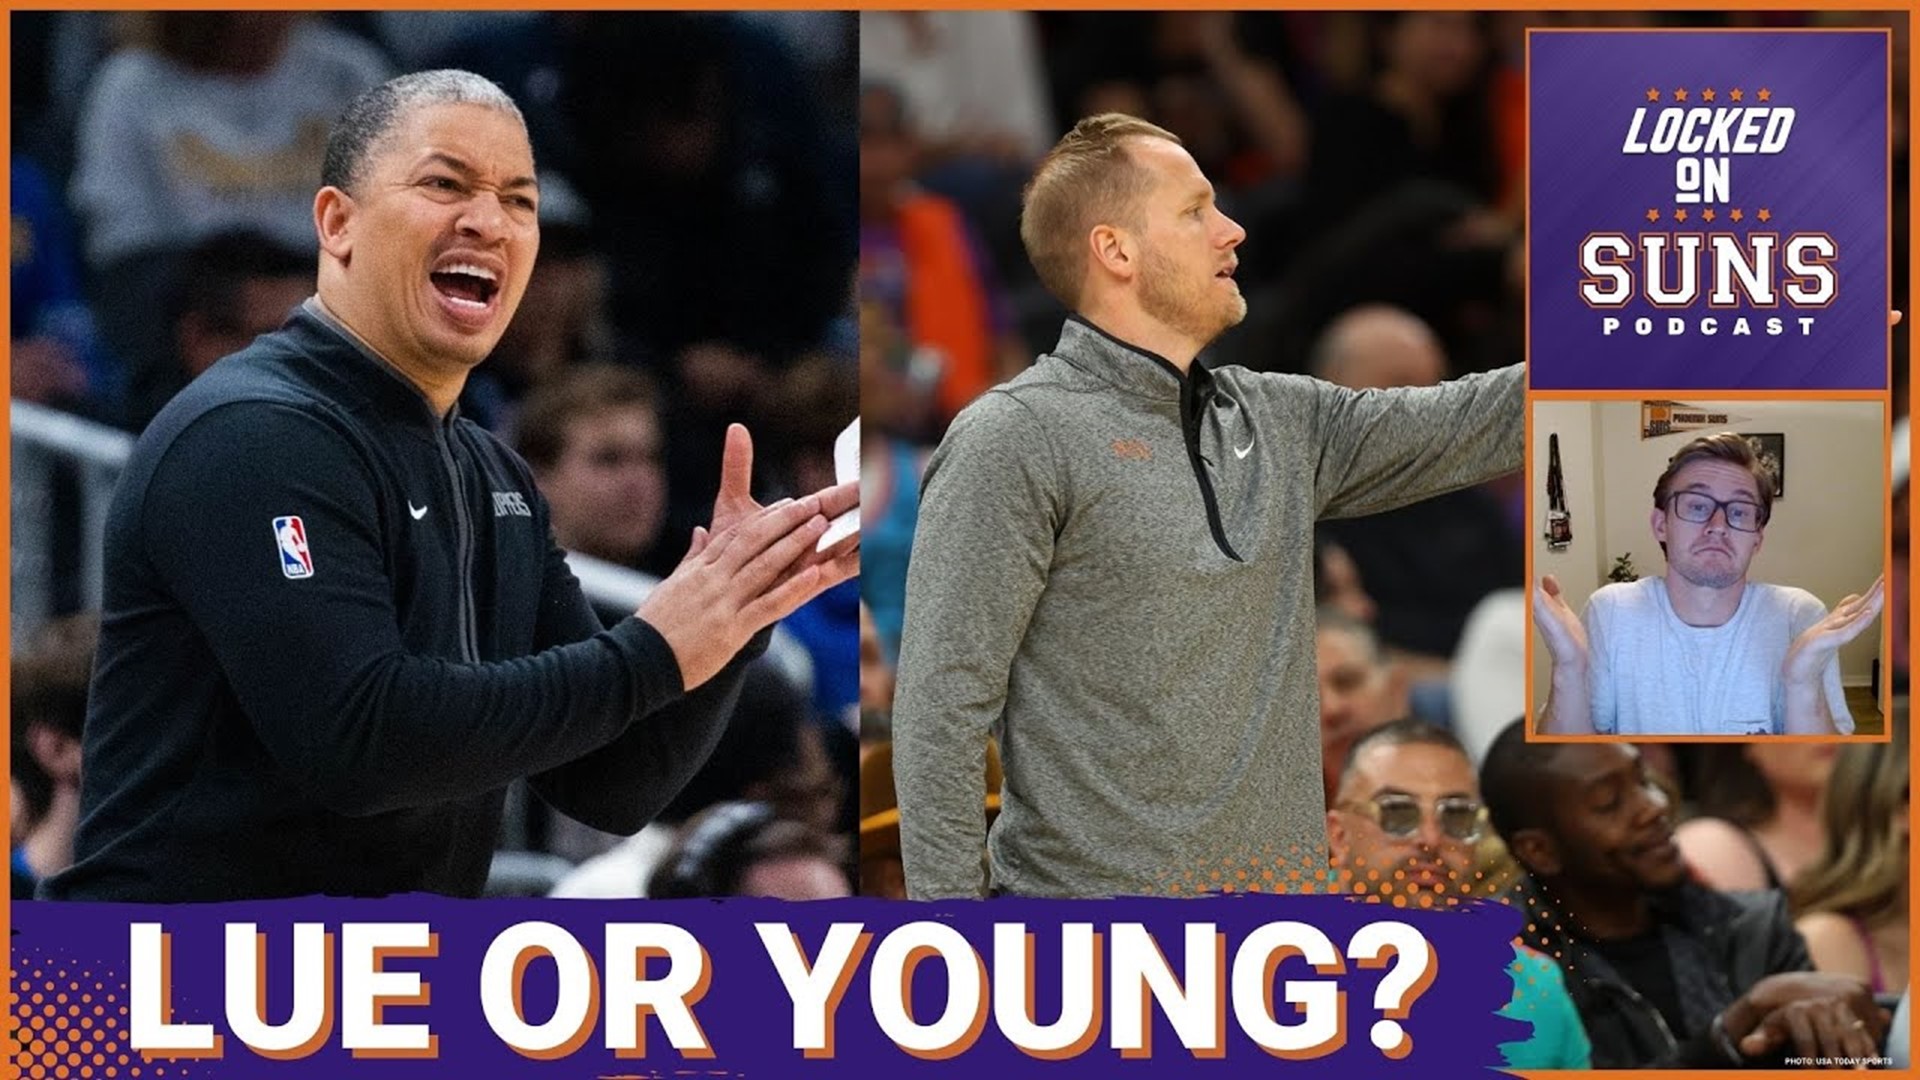 The Phoenix Suns are pursuing Ty Lue but also interviewing first-timers like Kevin Young, an assistant on their staff.